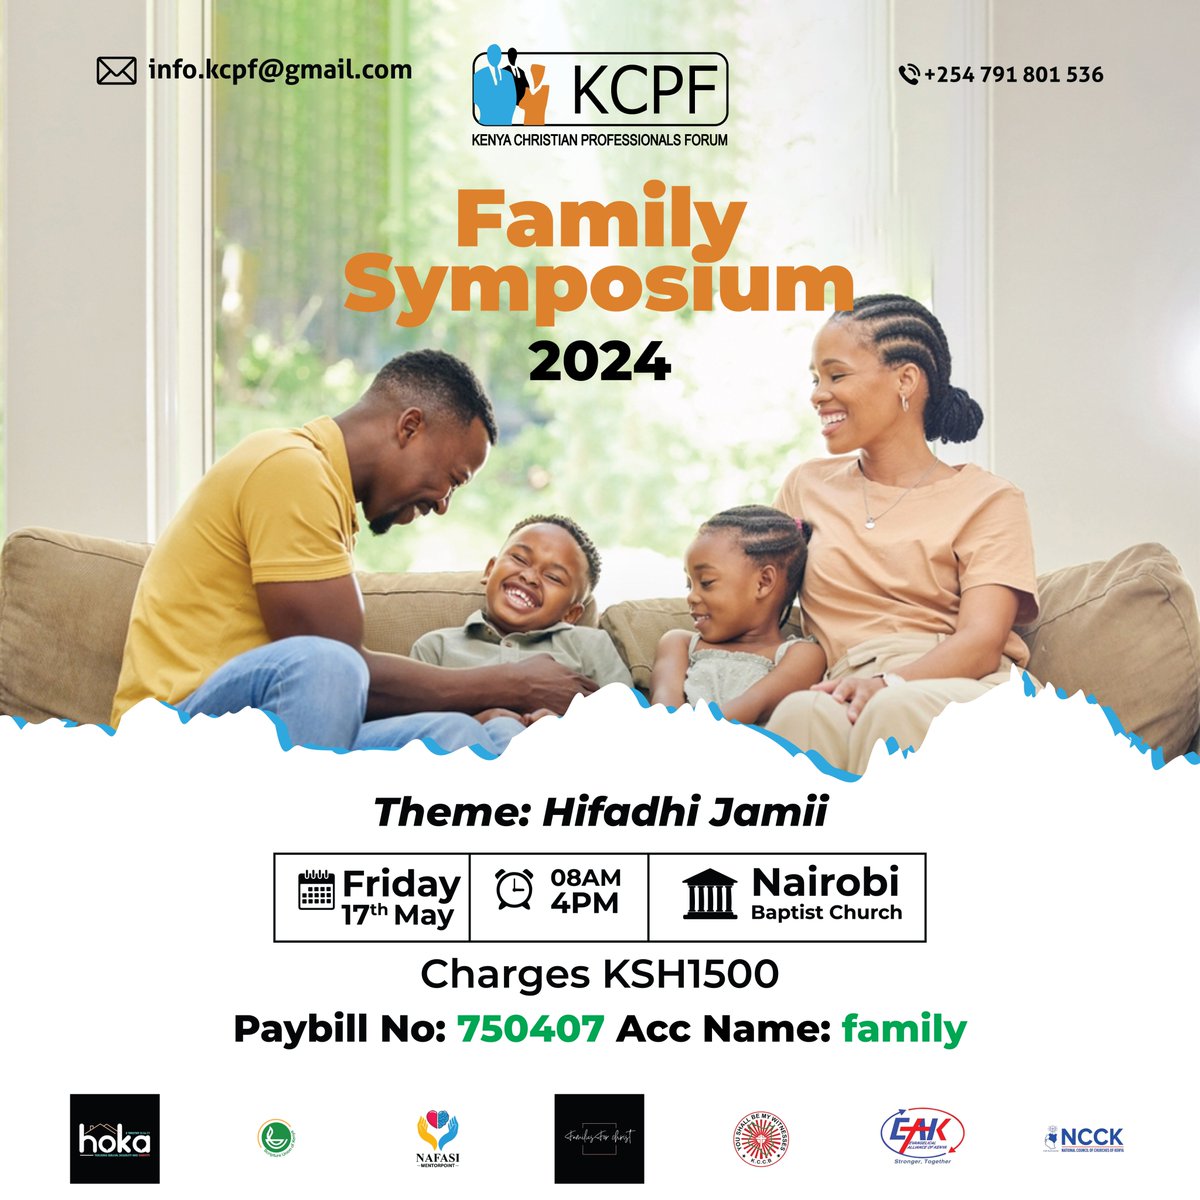 The family Symposium 2024 is happening on 17th May at the Nairobi Baptist Church and the theme is ''Hifadhi Jamii'. Don't miss out!